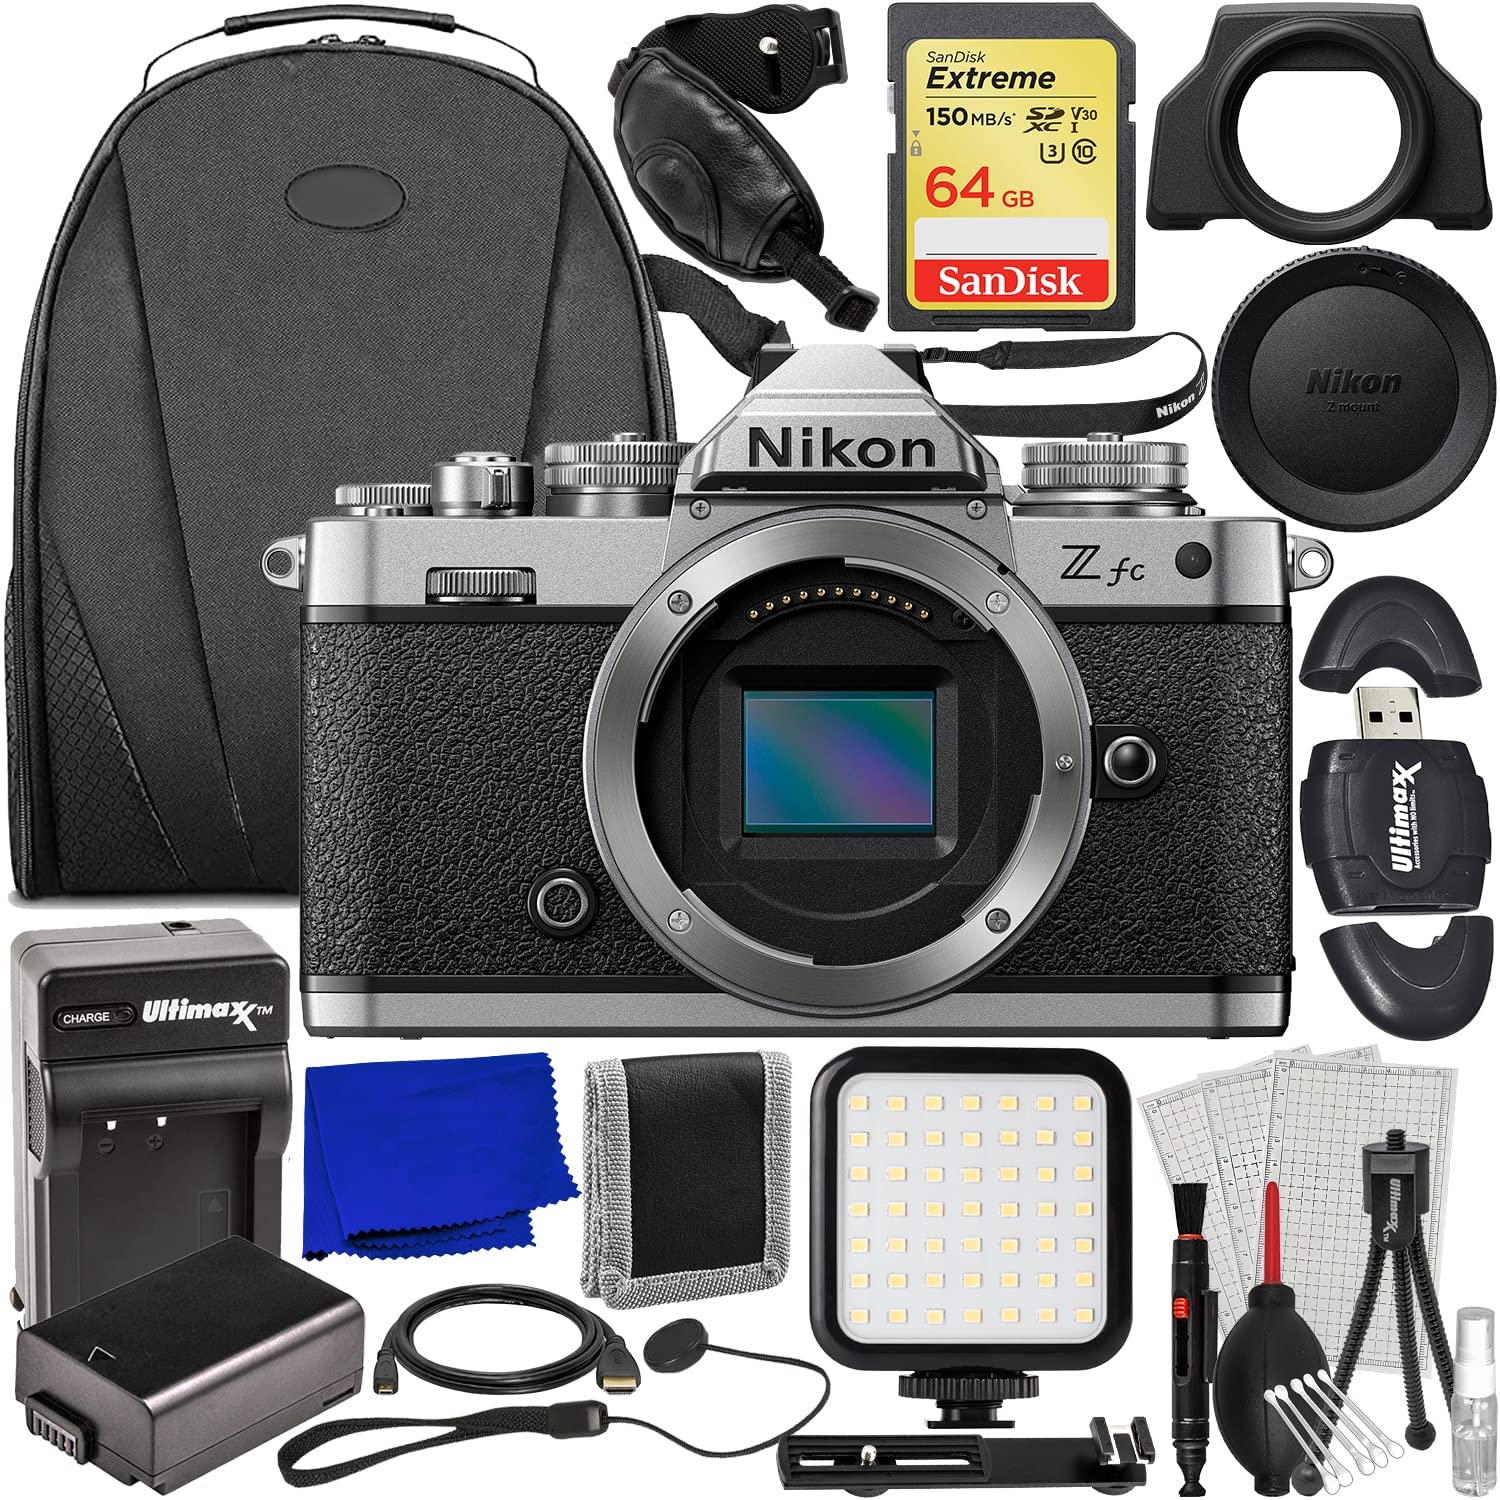 Nikon Zfc Mirrorless Camera (Body Only) with Essential Accessory Bundle: SanDisk 64GB Extreme SDXC, Spare Battery, Ultra-Bright LED Light Kit w/ Bracket & More (23pc Bundle)